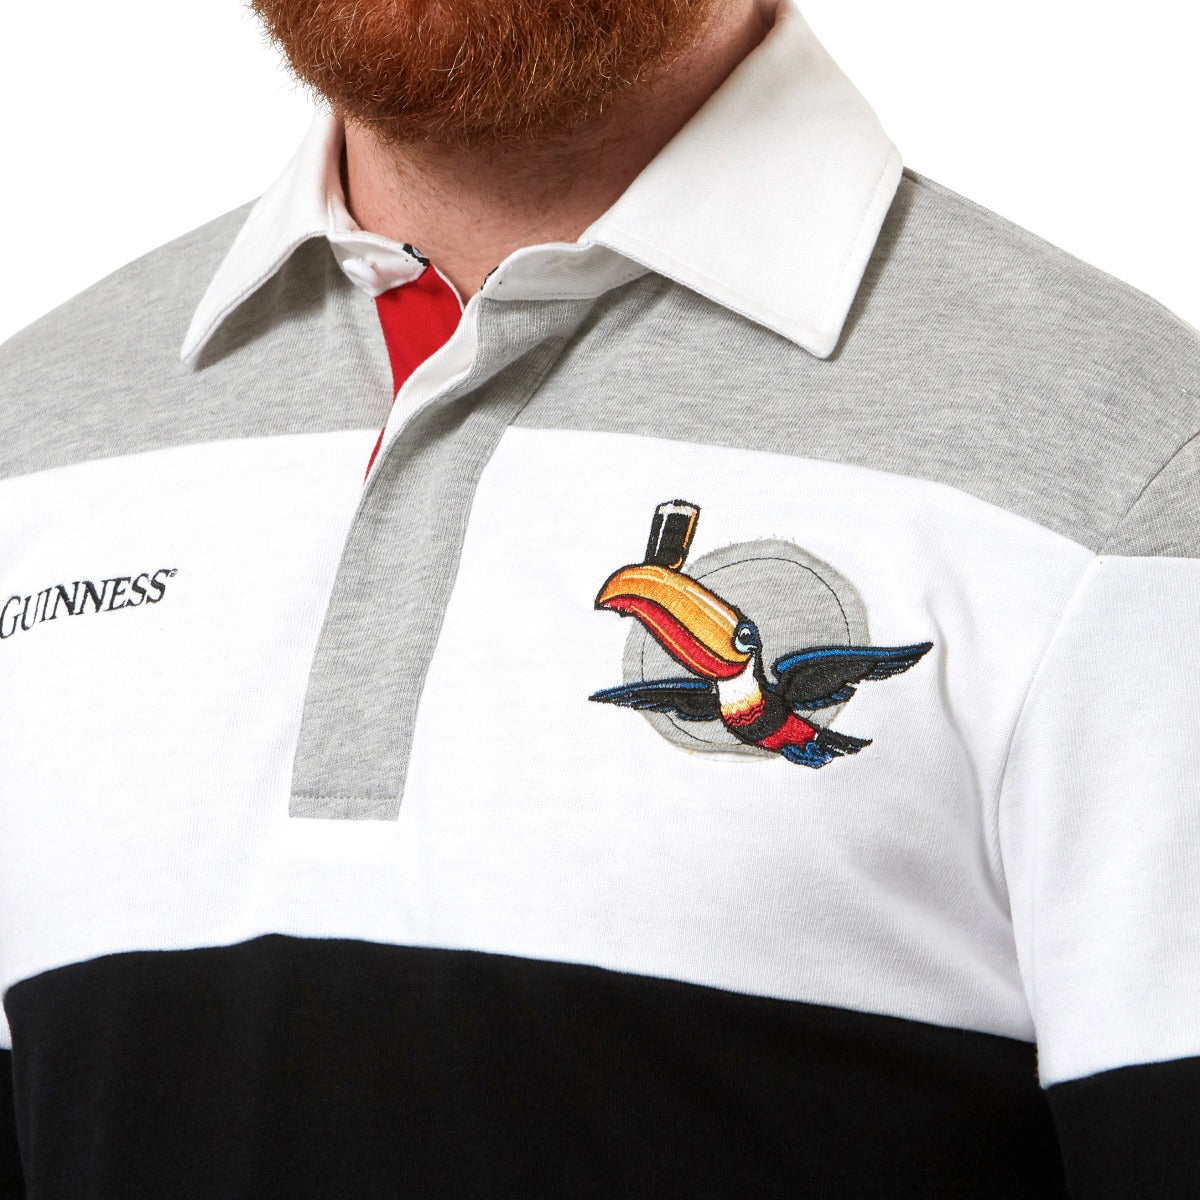 A bearded man wearing a Guinness Toucan Rugby Jersey representing Guinness UK branding.